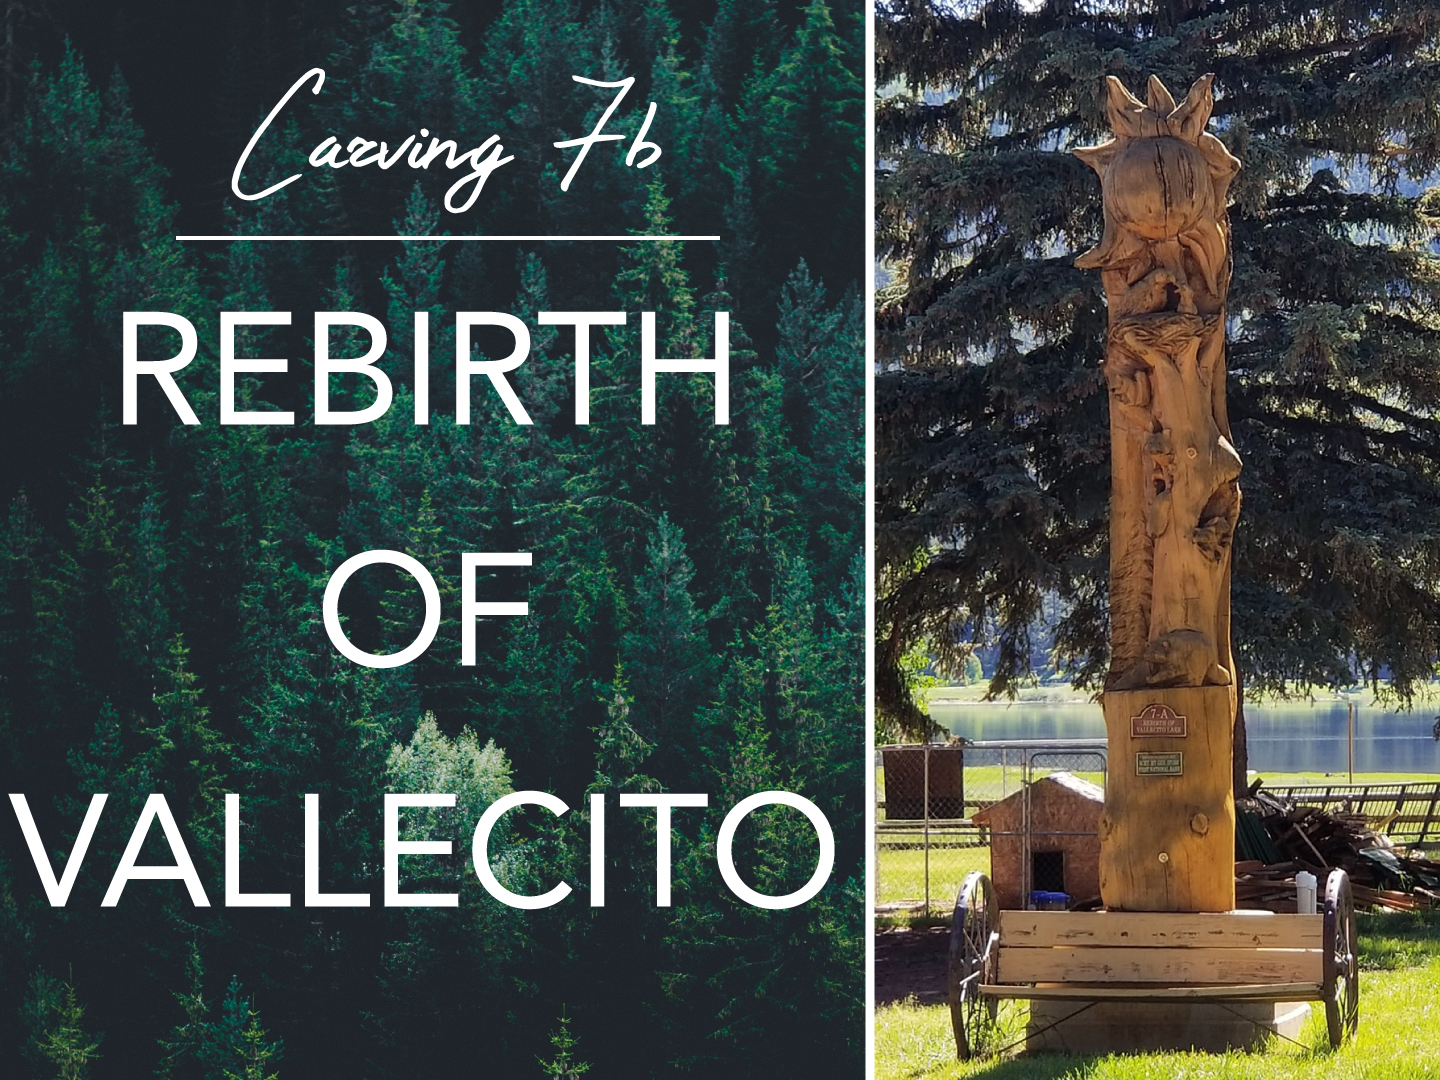 Tour of Carvings Vallecito Lake CO